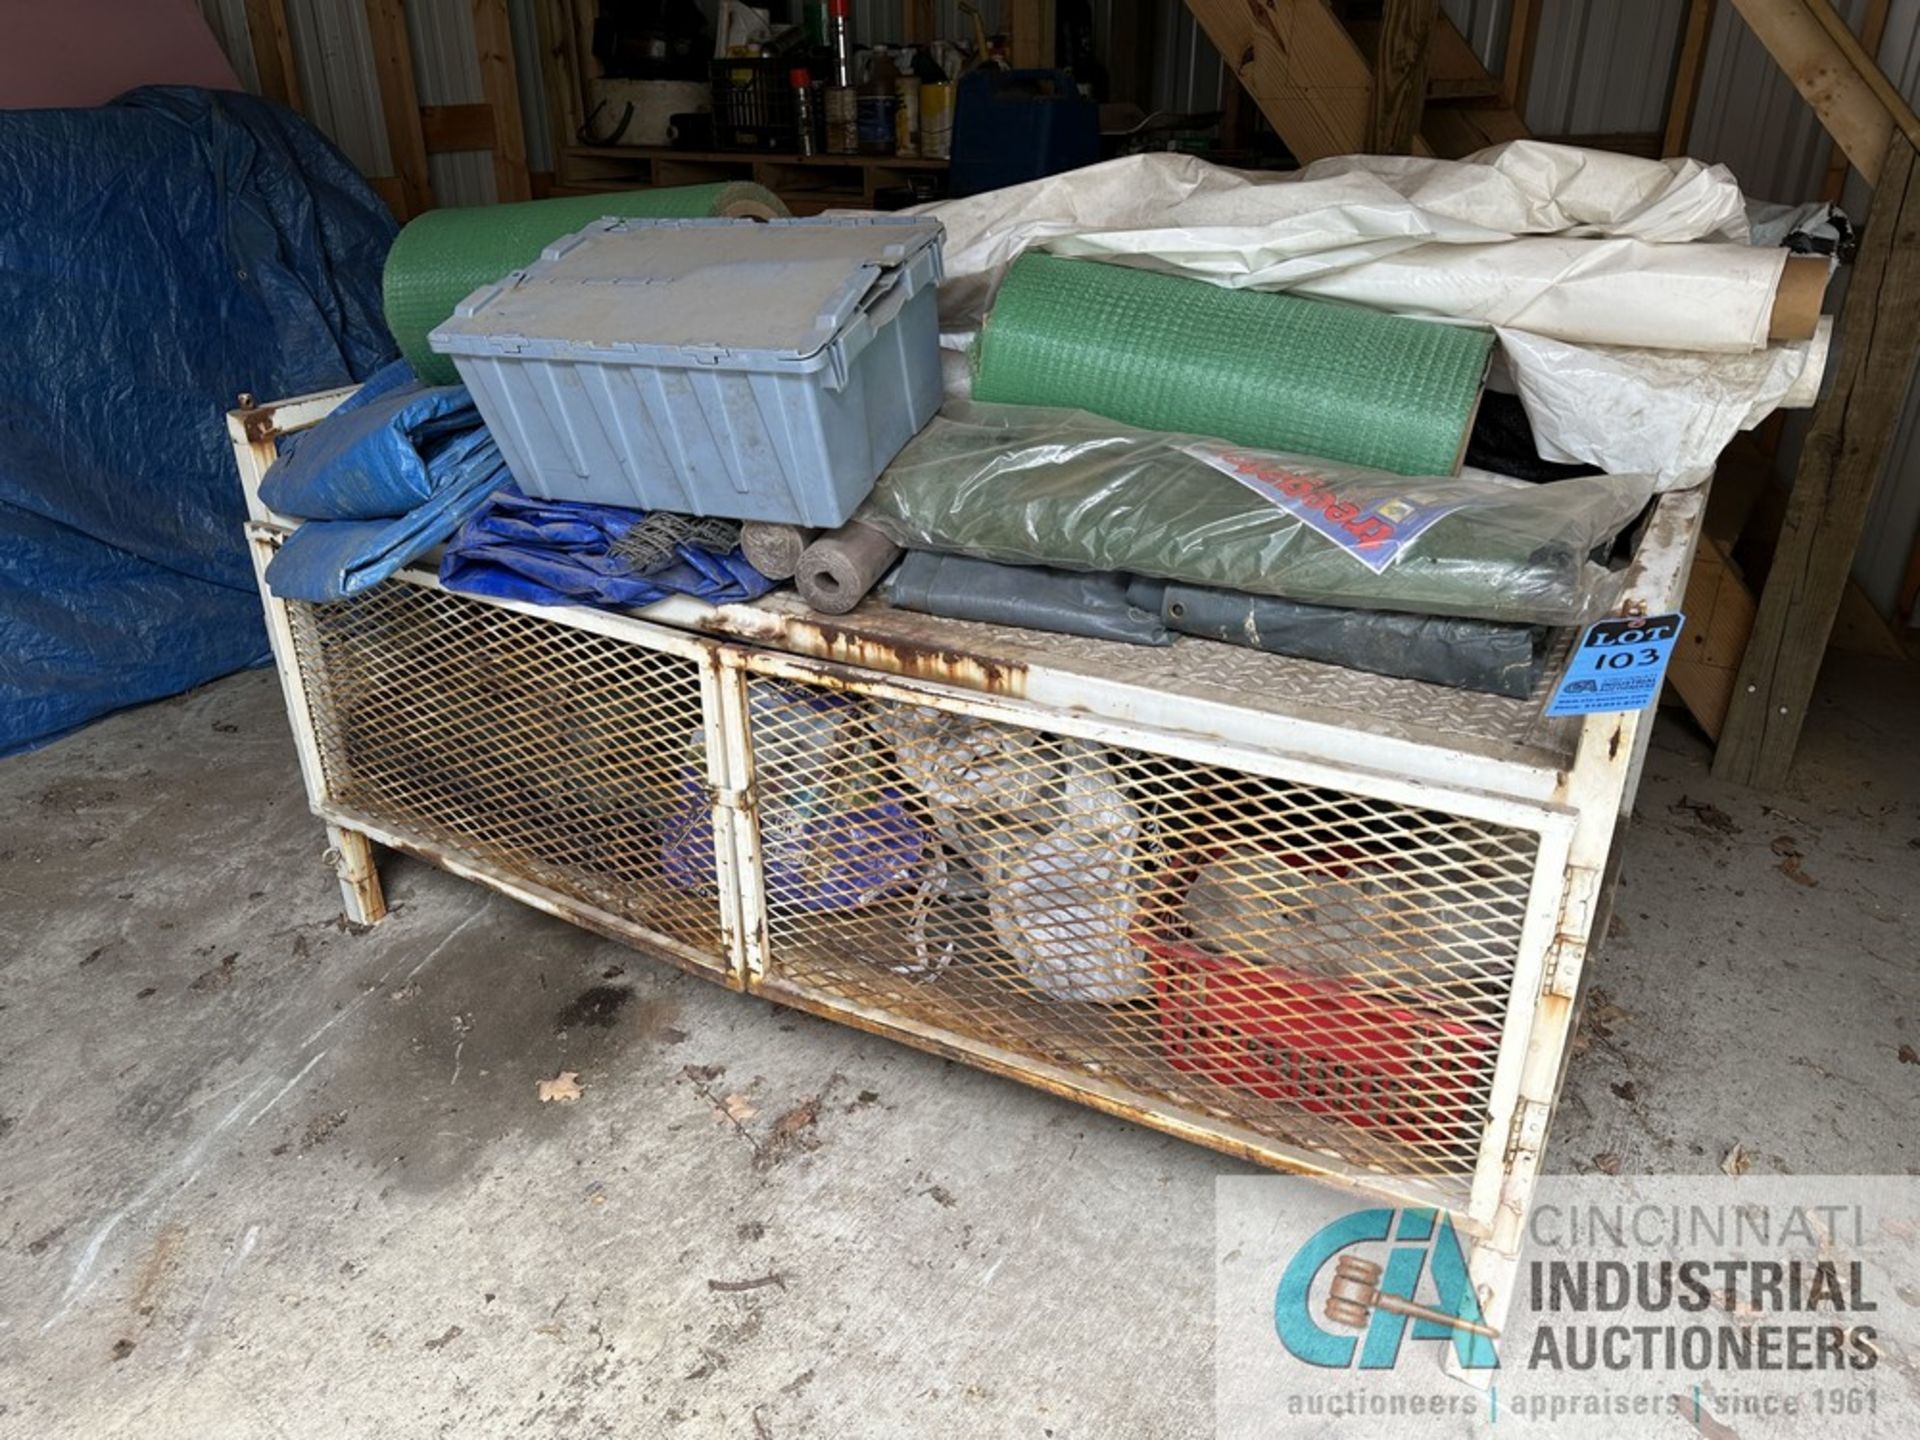 STEEL WIRE GRATED STORAGE BOX WITH MISCELLANEOUS TARPS *LOCATED IN SHED AT REAR OF BUILDING*